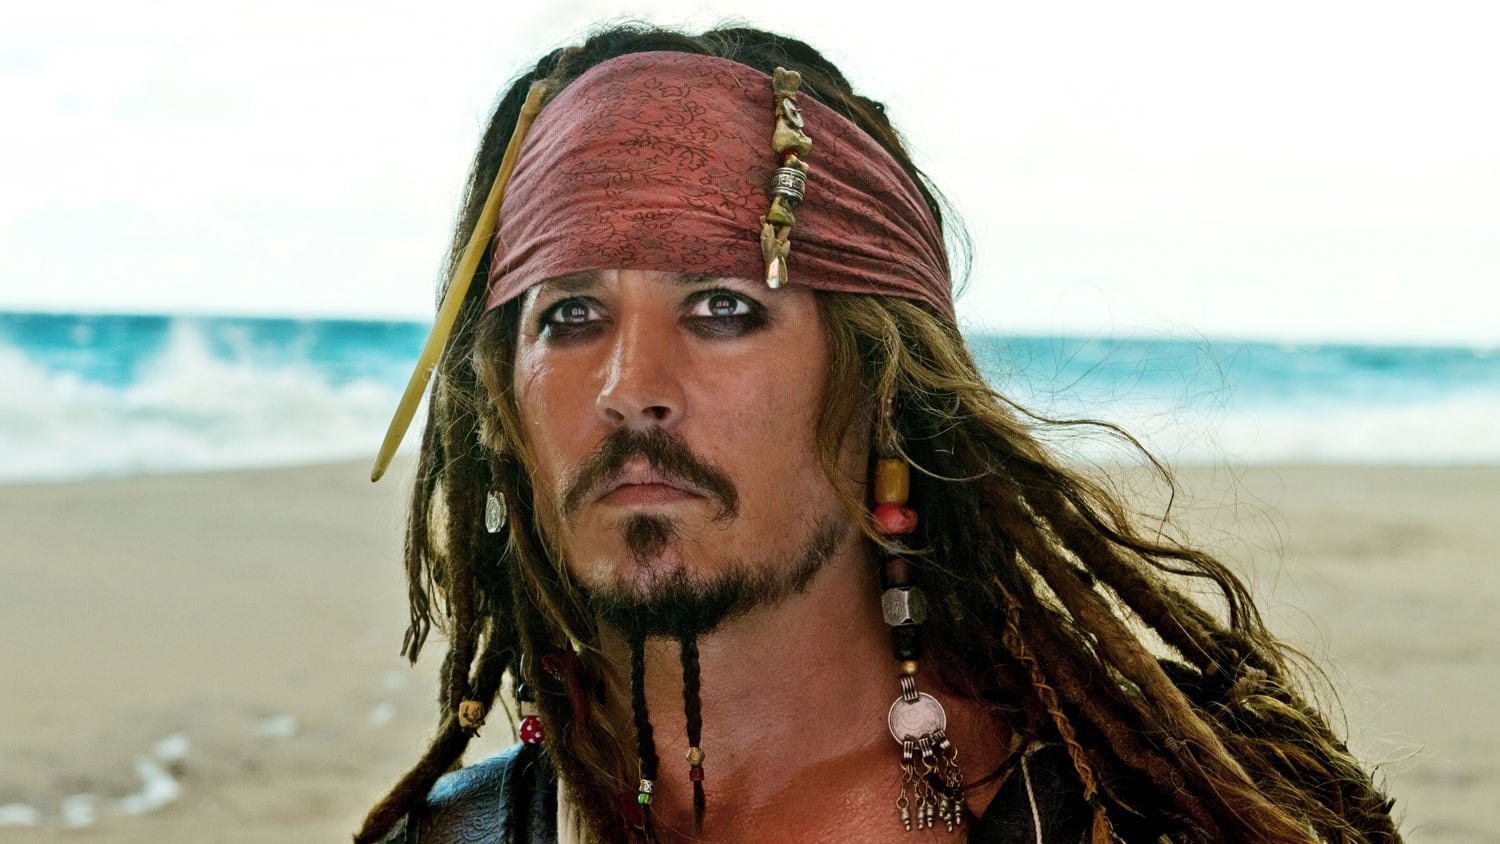 Johnny-Depp-Reportedly-In-Talks-With-Disney-For-Pirates-Of-The-Caribbean-Return